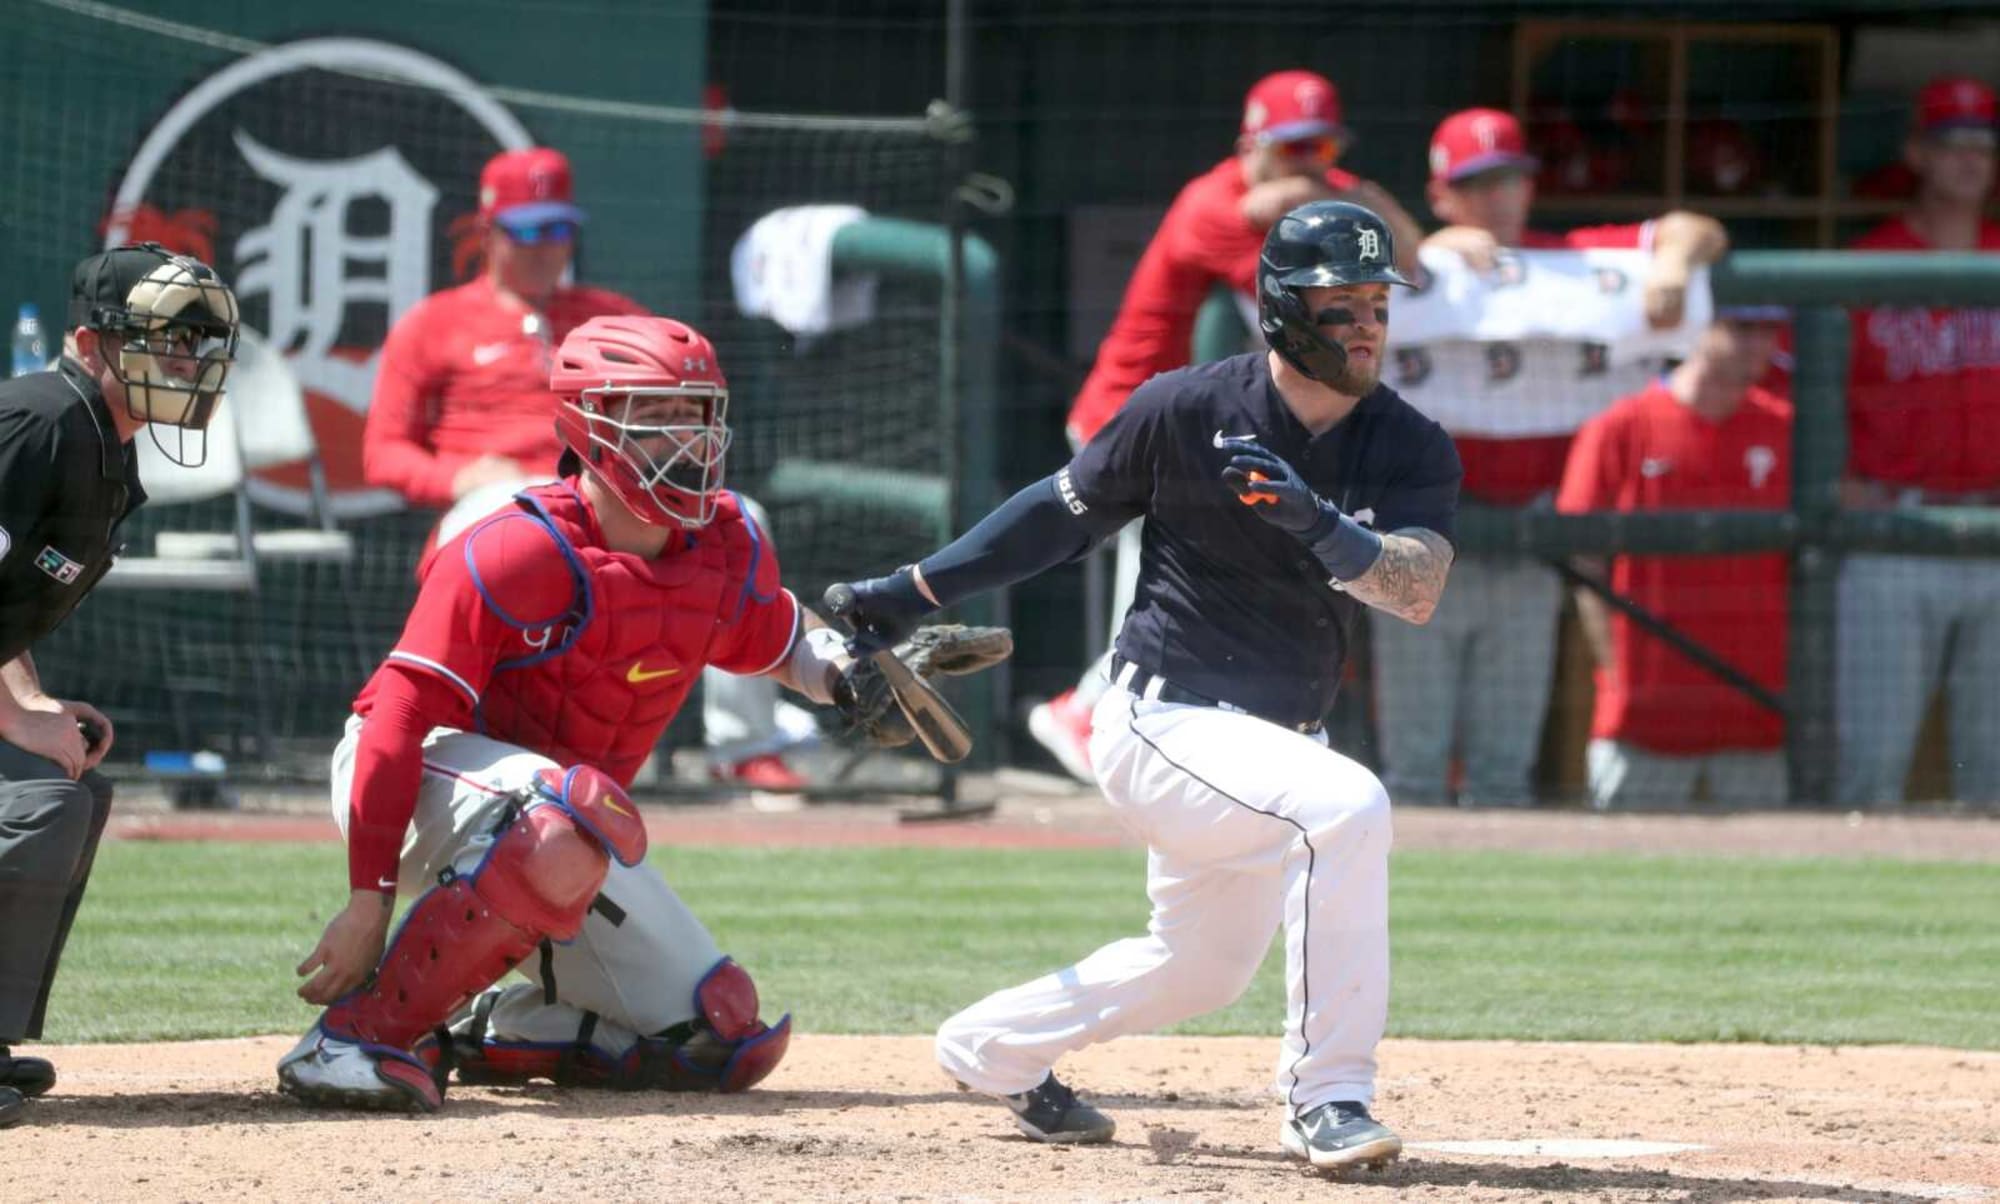 Detroit Tigers: Tucker Barnhart as a switch-hitter adds more value